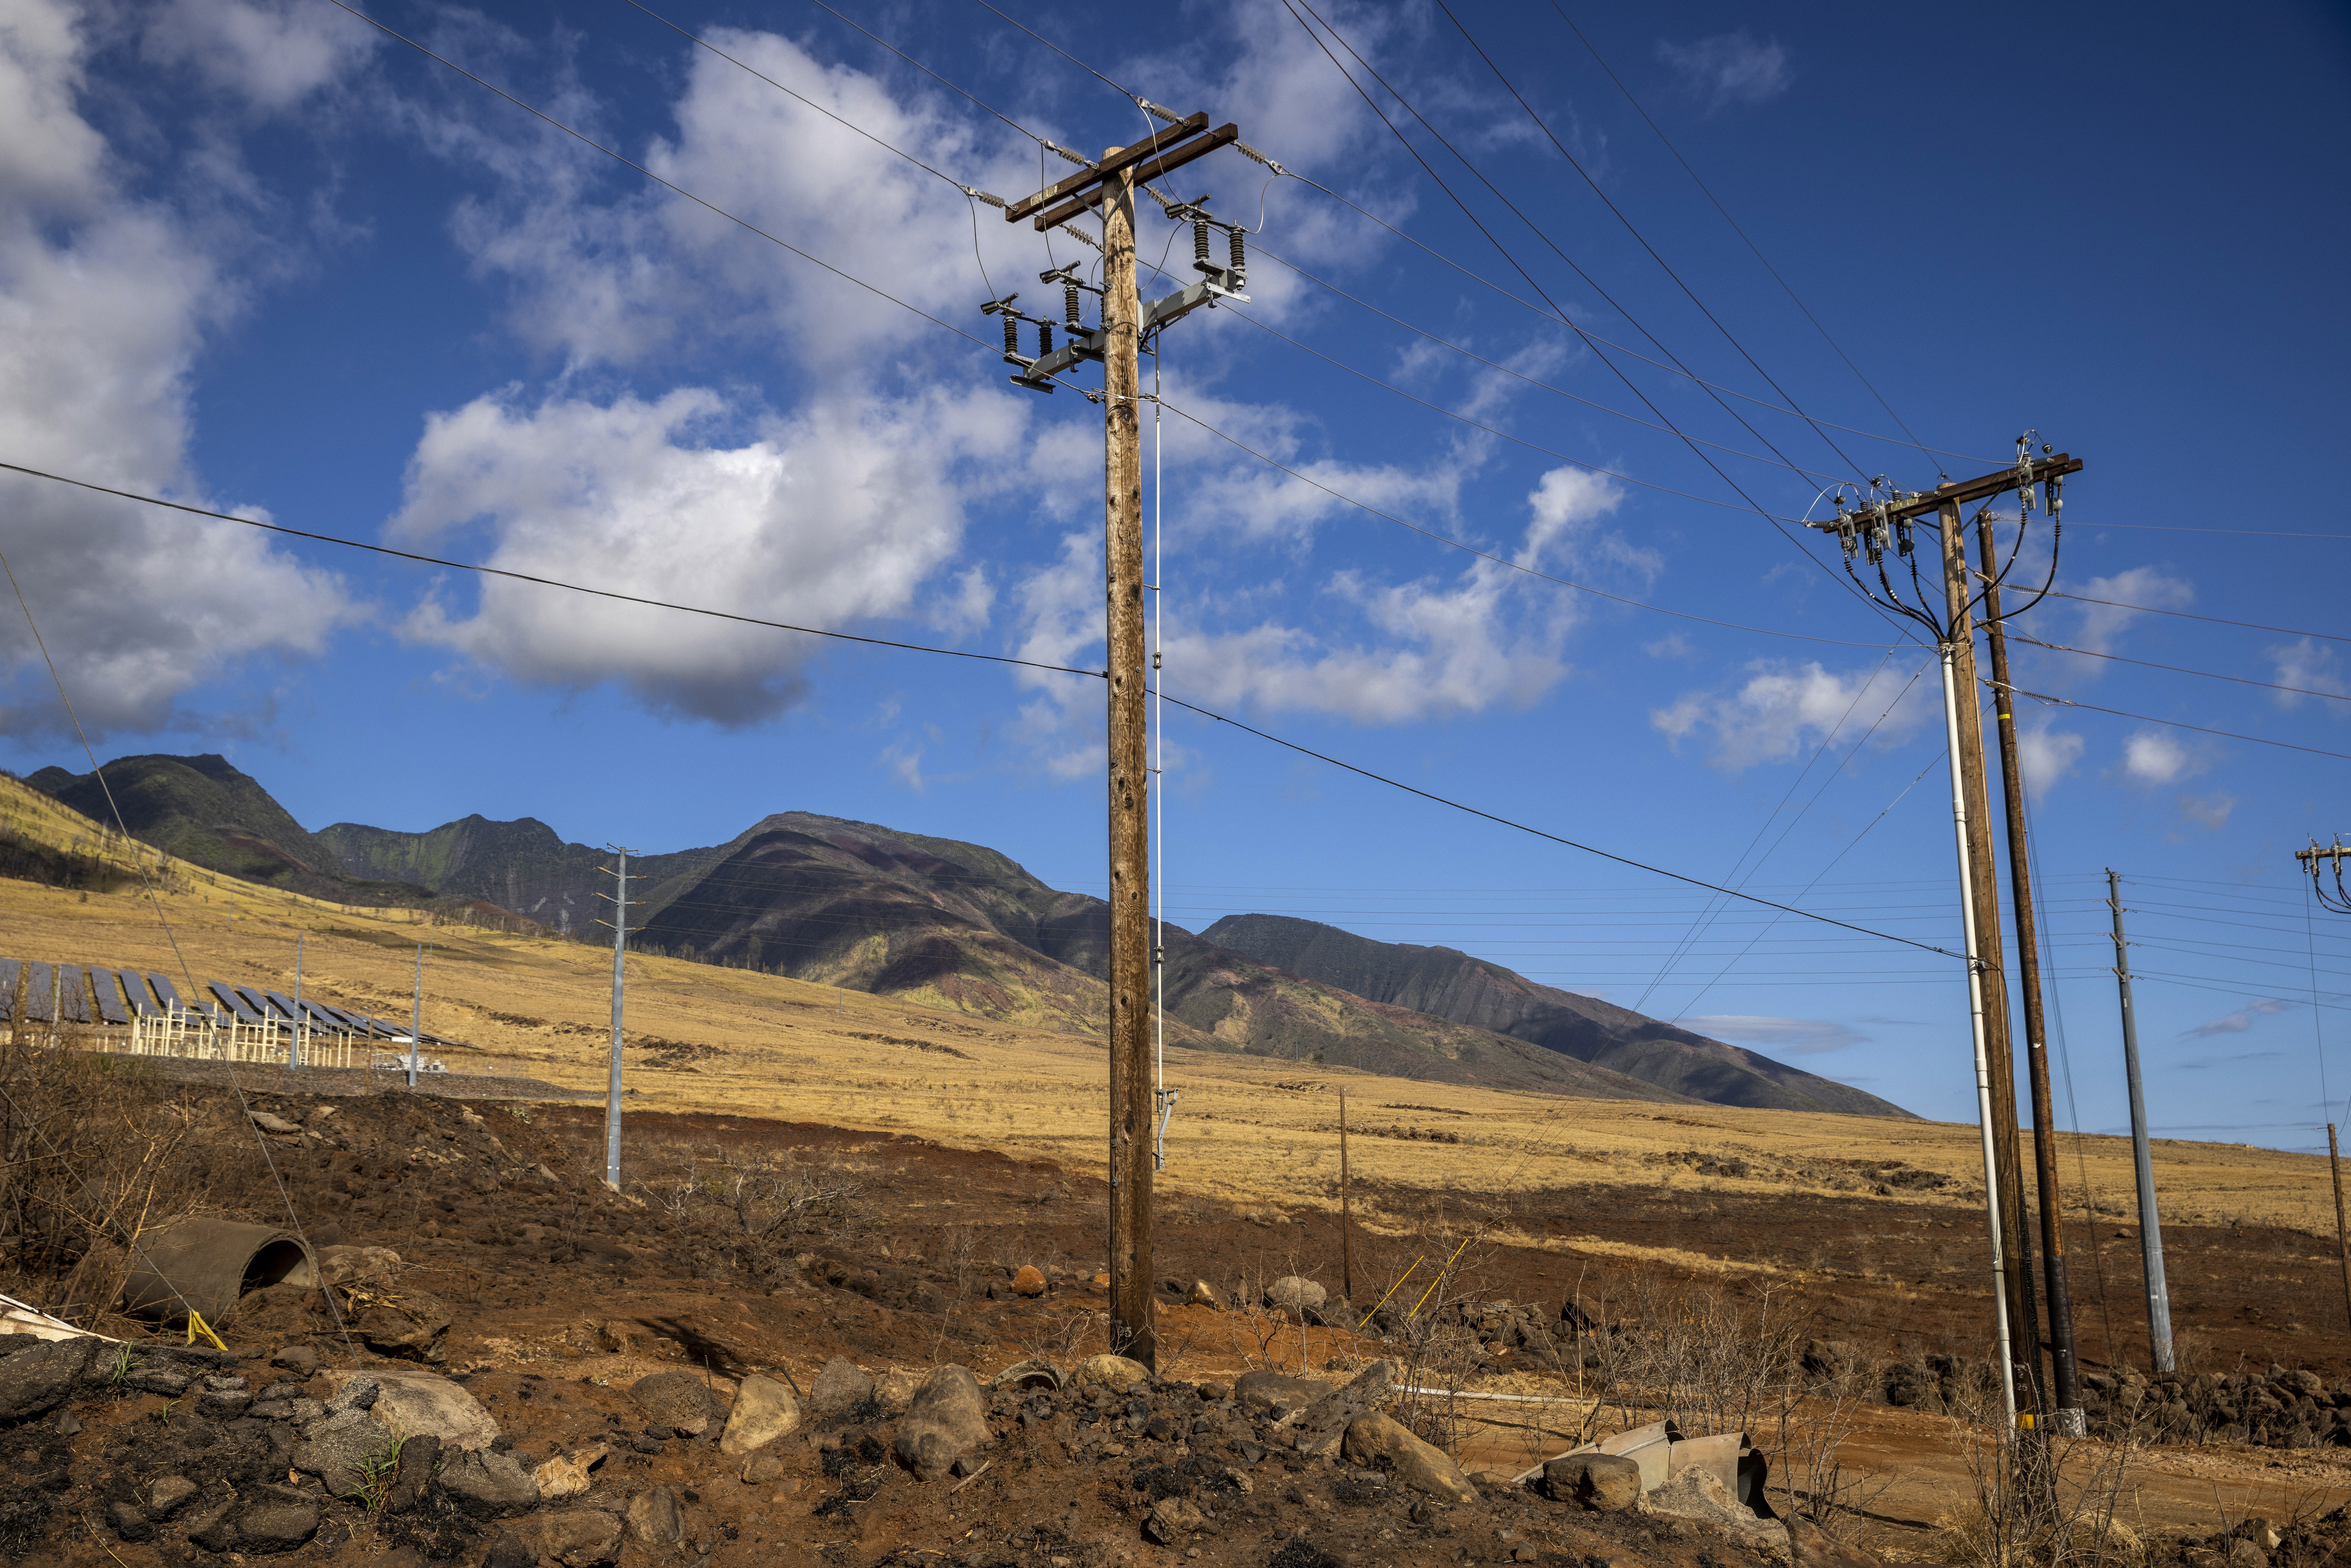 Bare electrical wire and leaning poles on Maui were possible cause